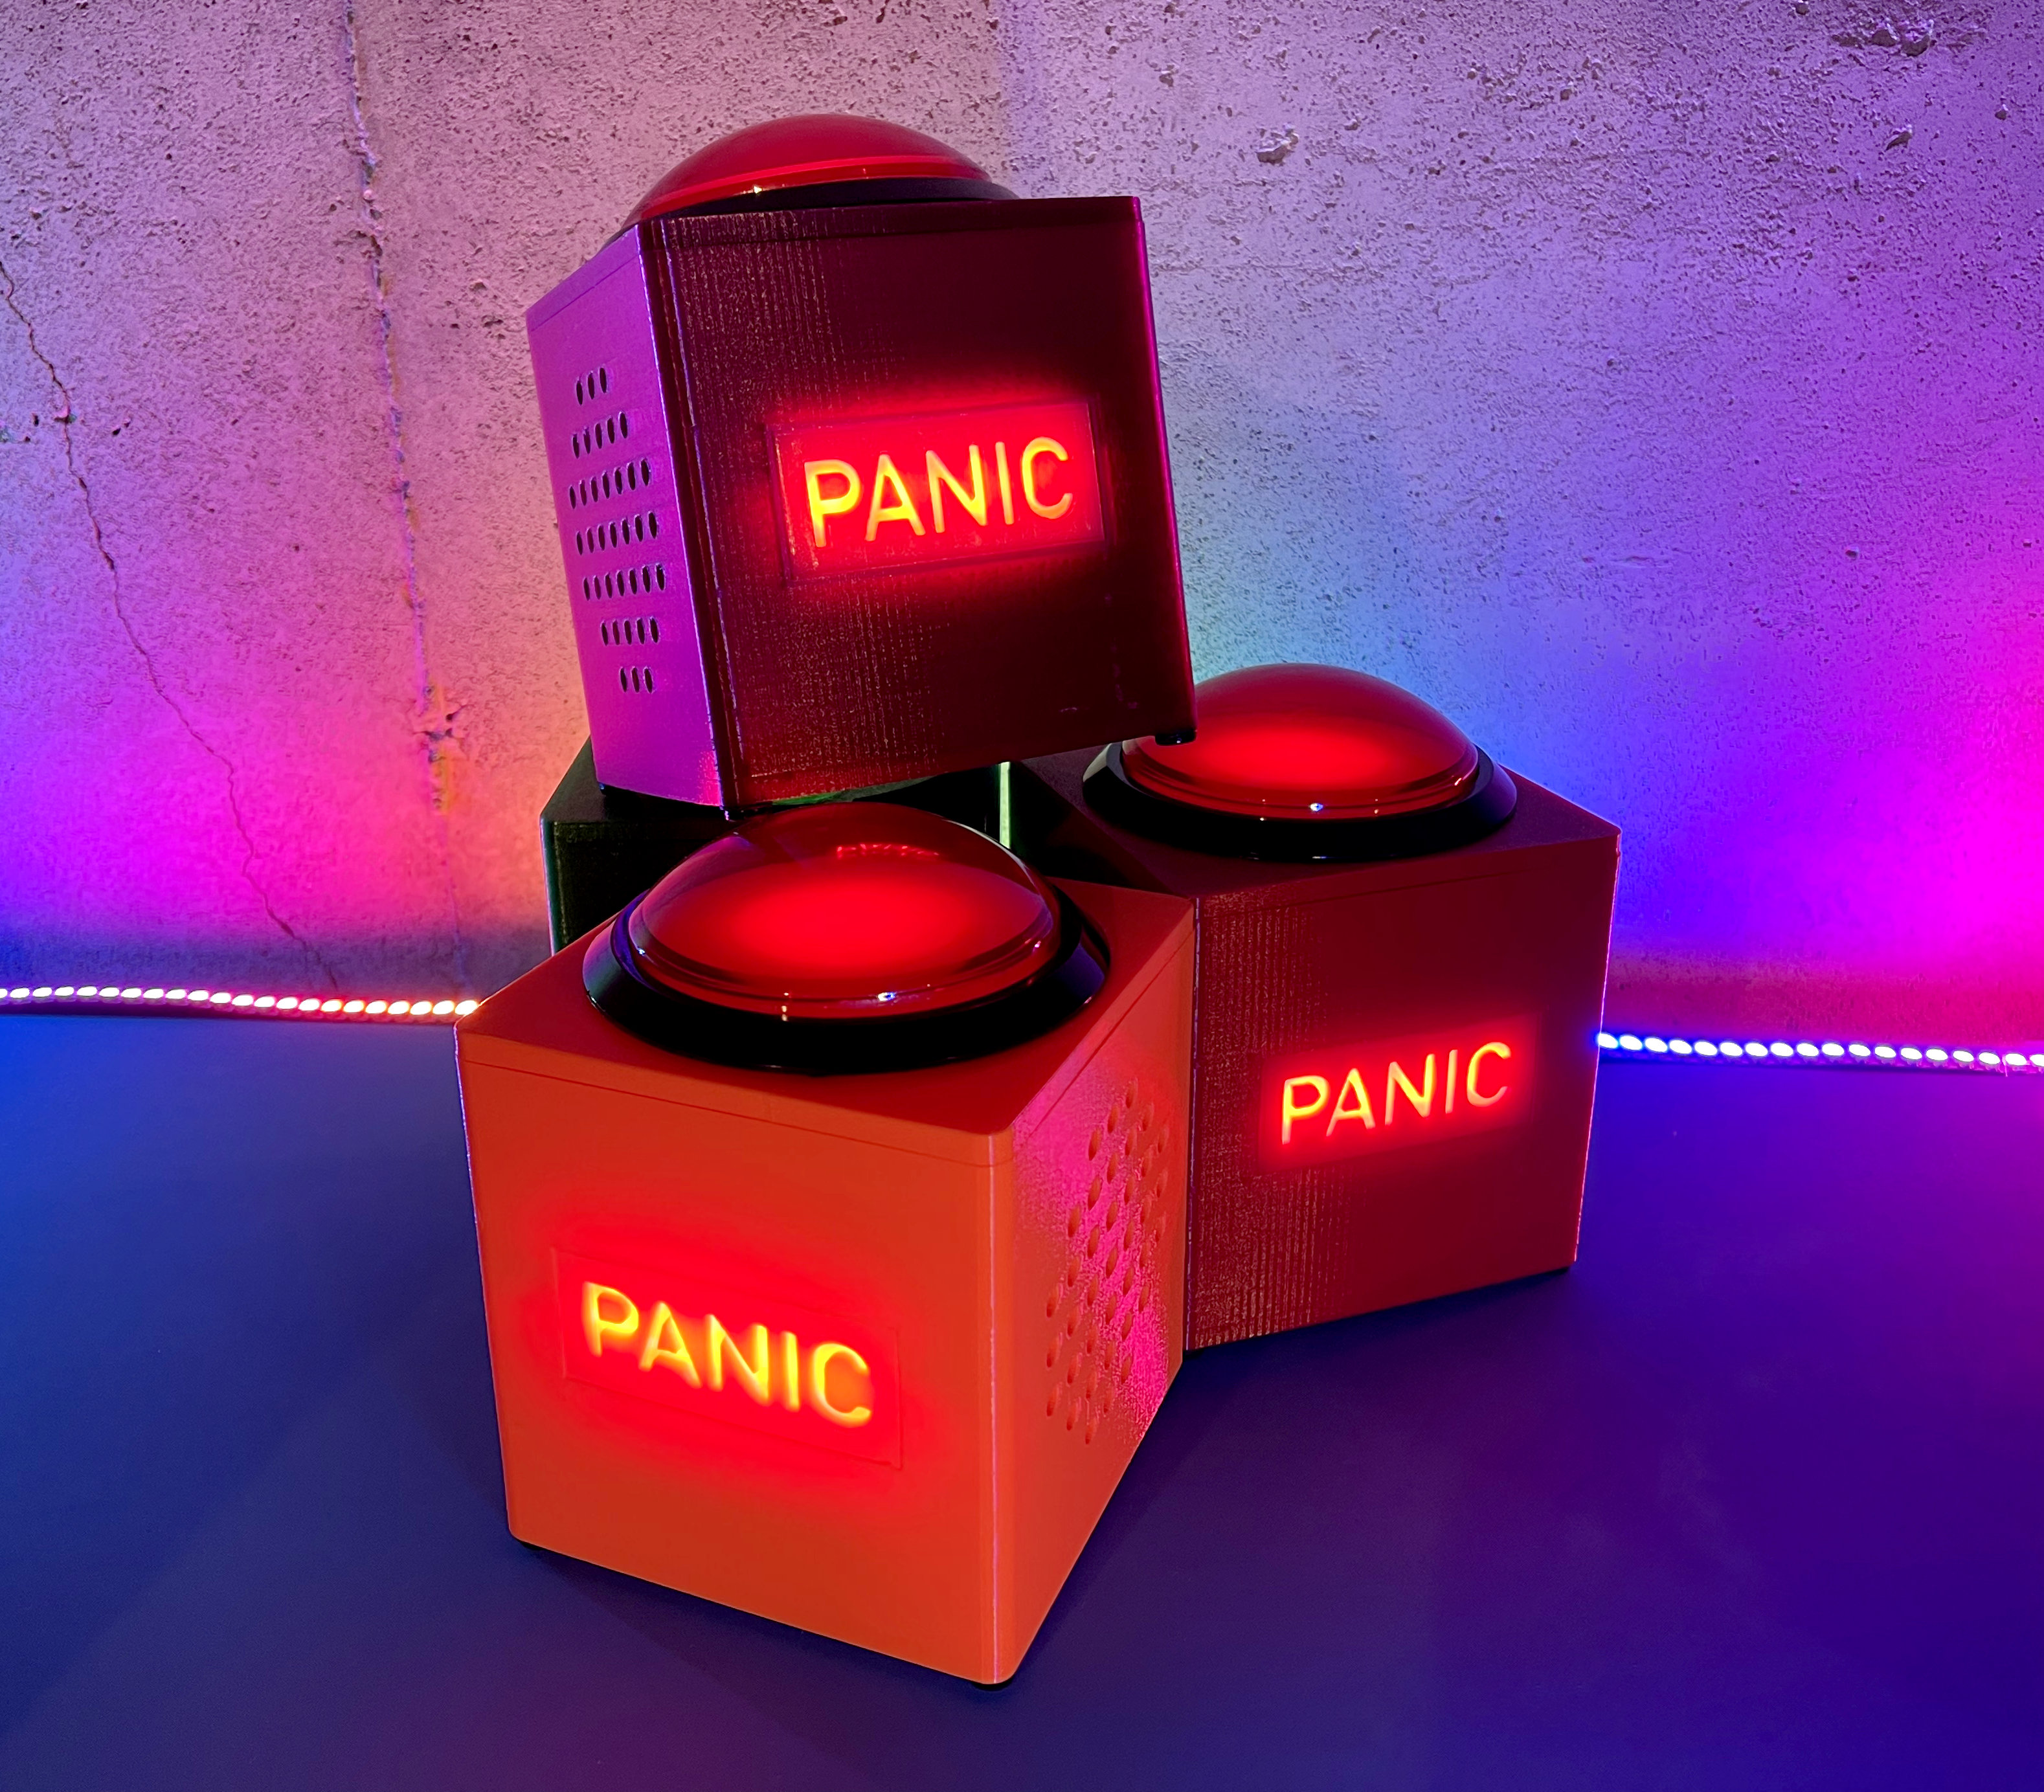 WiFi-Connected Panic Button Parts